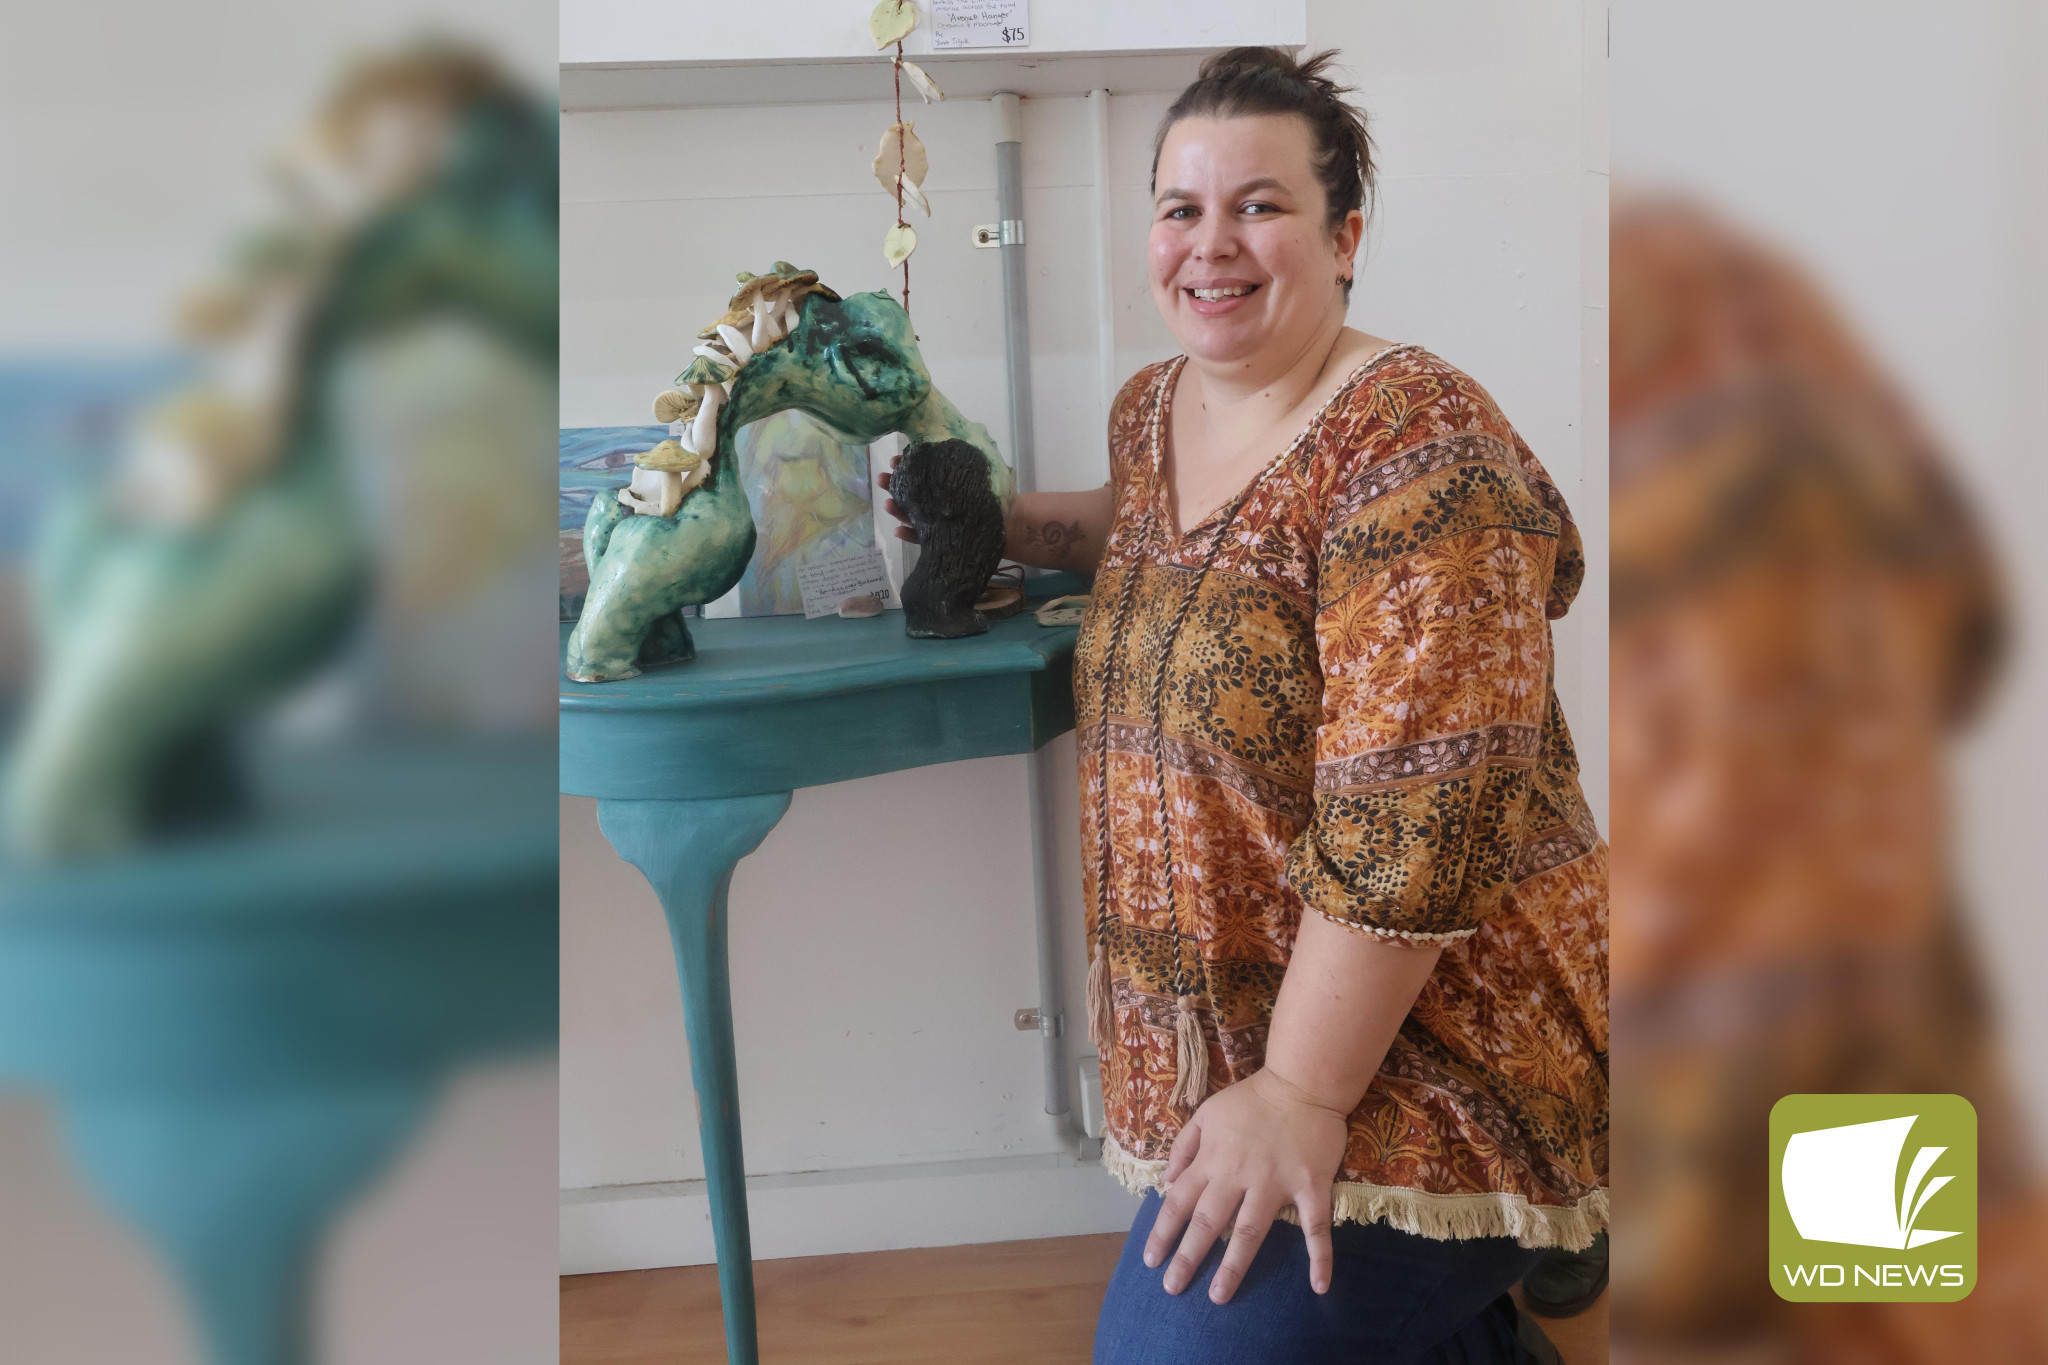 Crazy about ceramics: Ceramics artist Yonie Tiljak (pictured with her sculpture “Bending over backwards”) is inviting residents to learn more about her favoured medium.